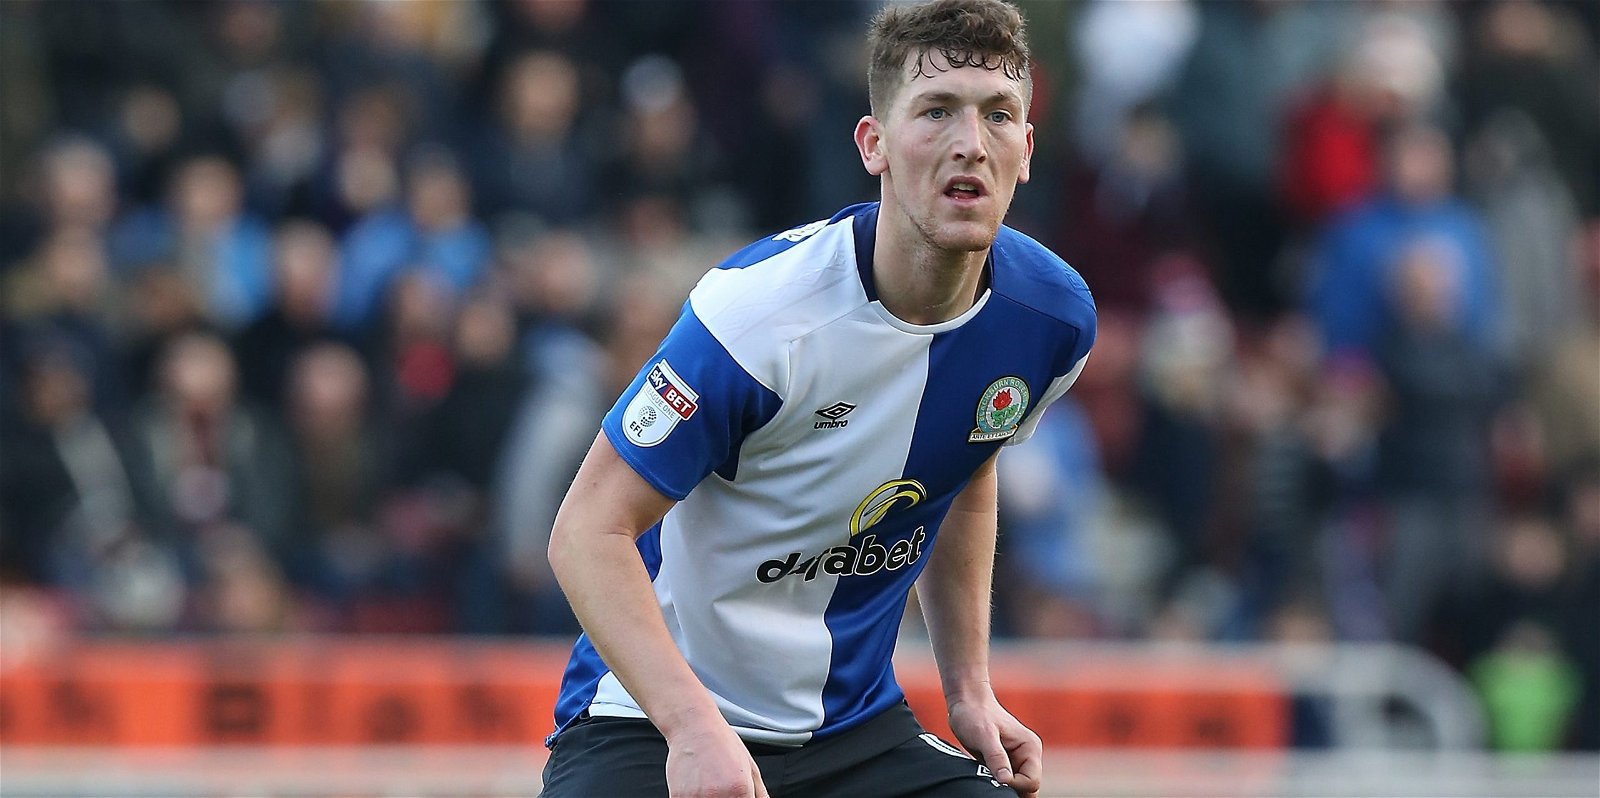 Portsmouth, Could Portsmouth sign ex-Rotherham United midfielder from Blackburn Rovers?